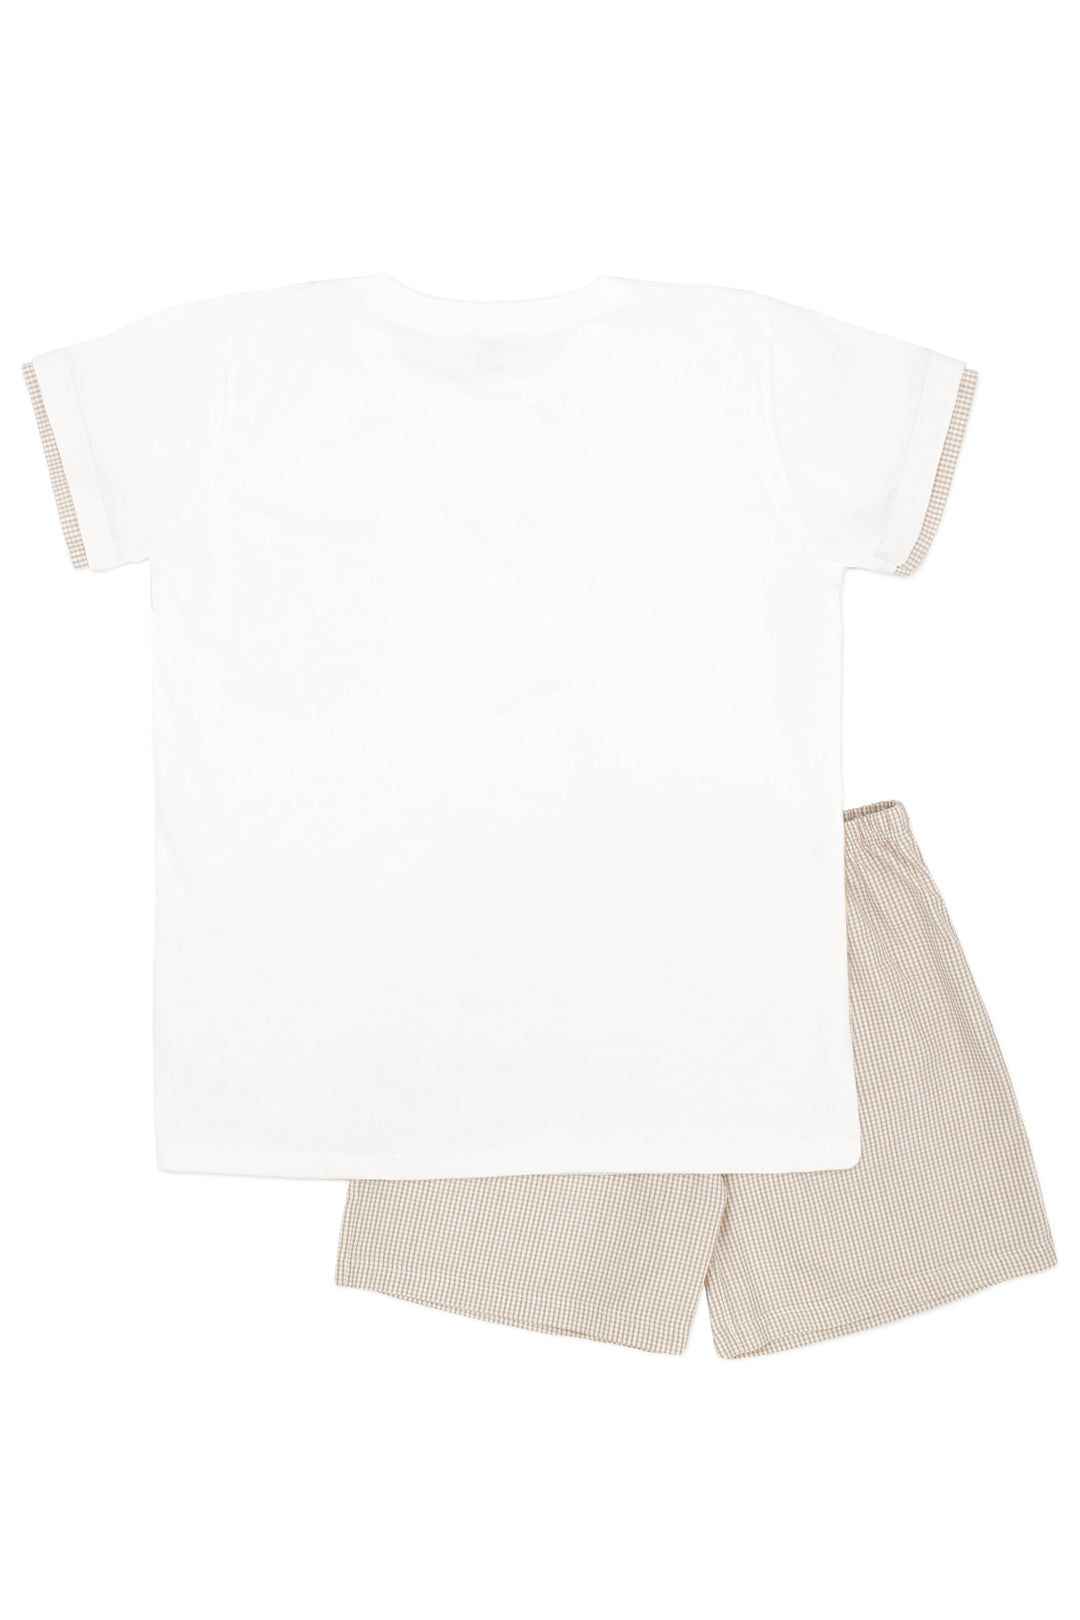 Rapife "Xavier" Beige Checked T-Shirt & Shorts | Millie and John